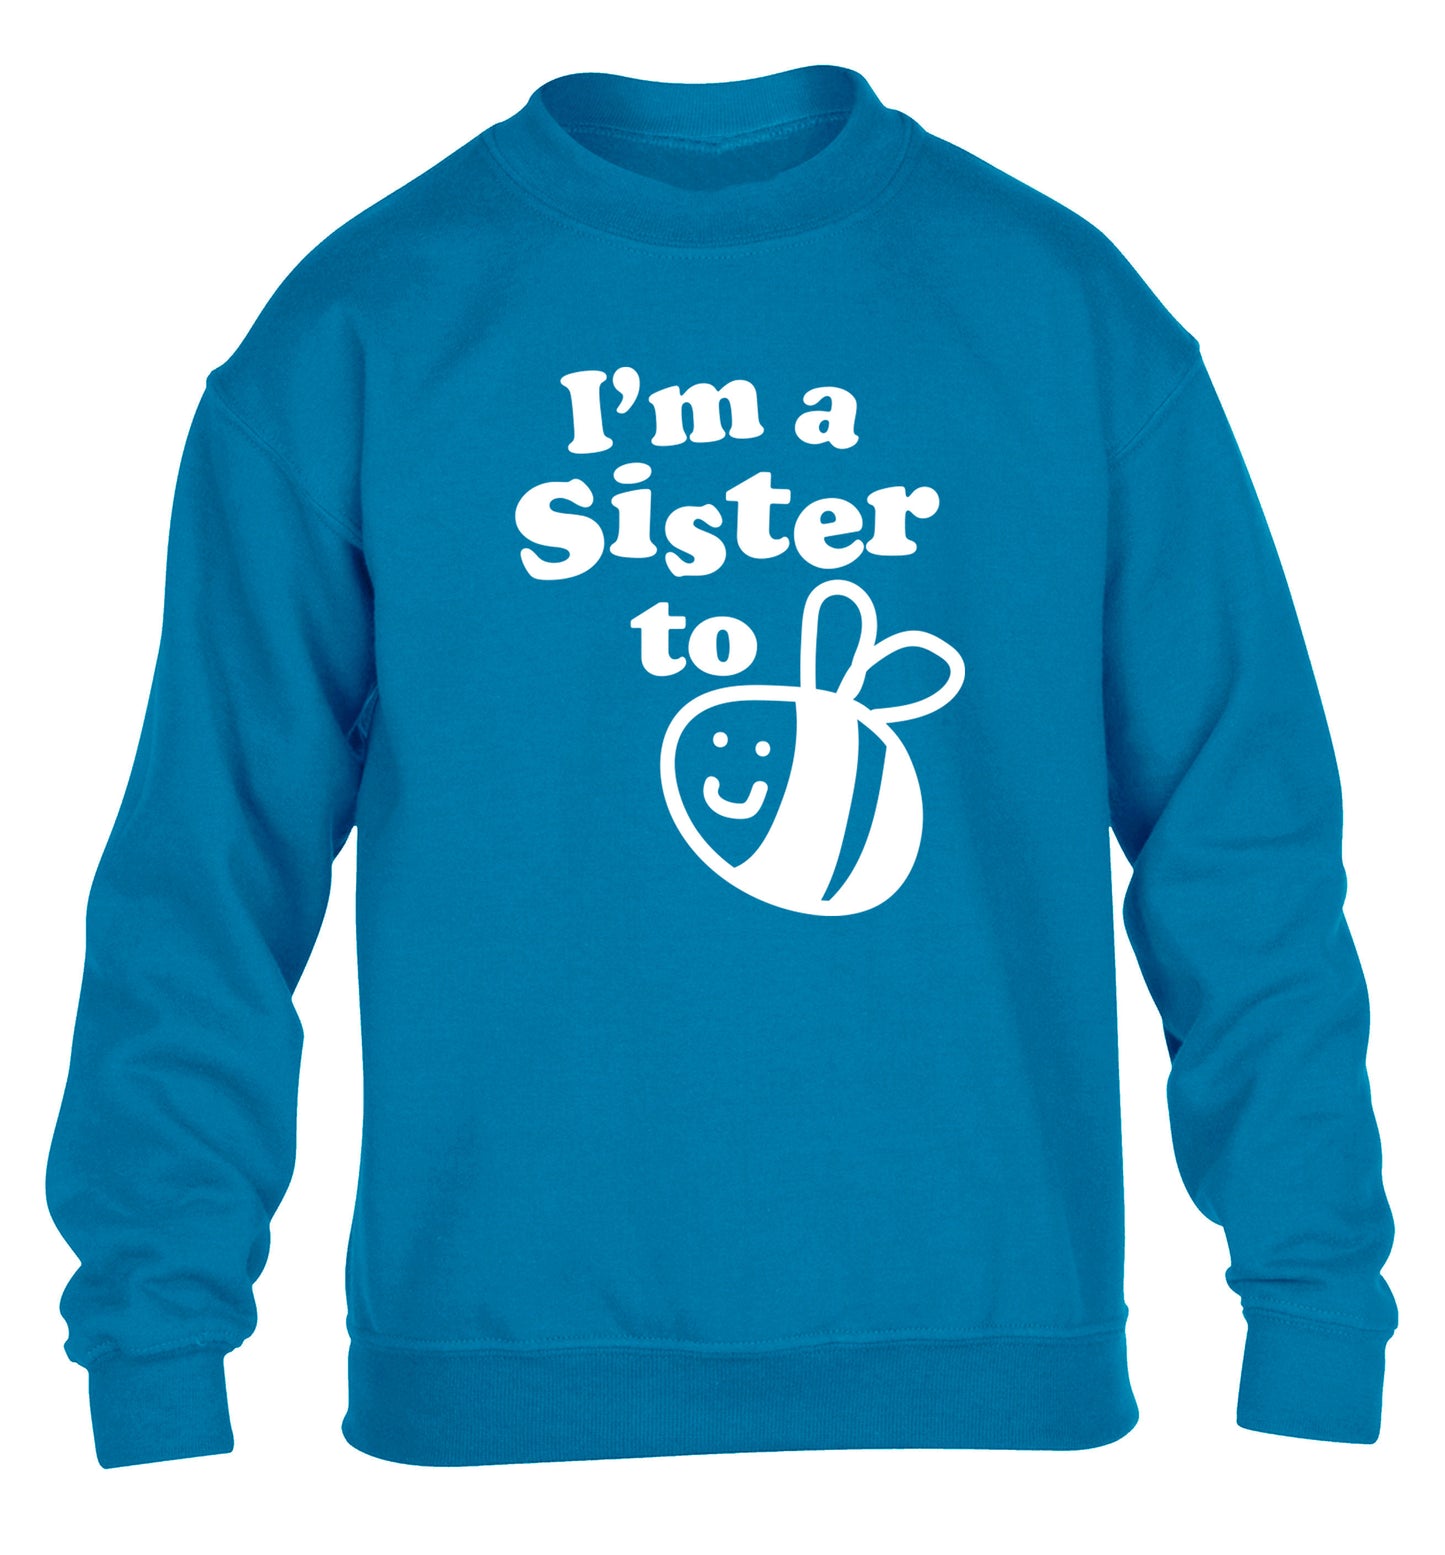 I'm a sister to be children's blue sweater 12-14 Years